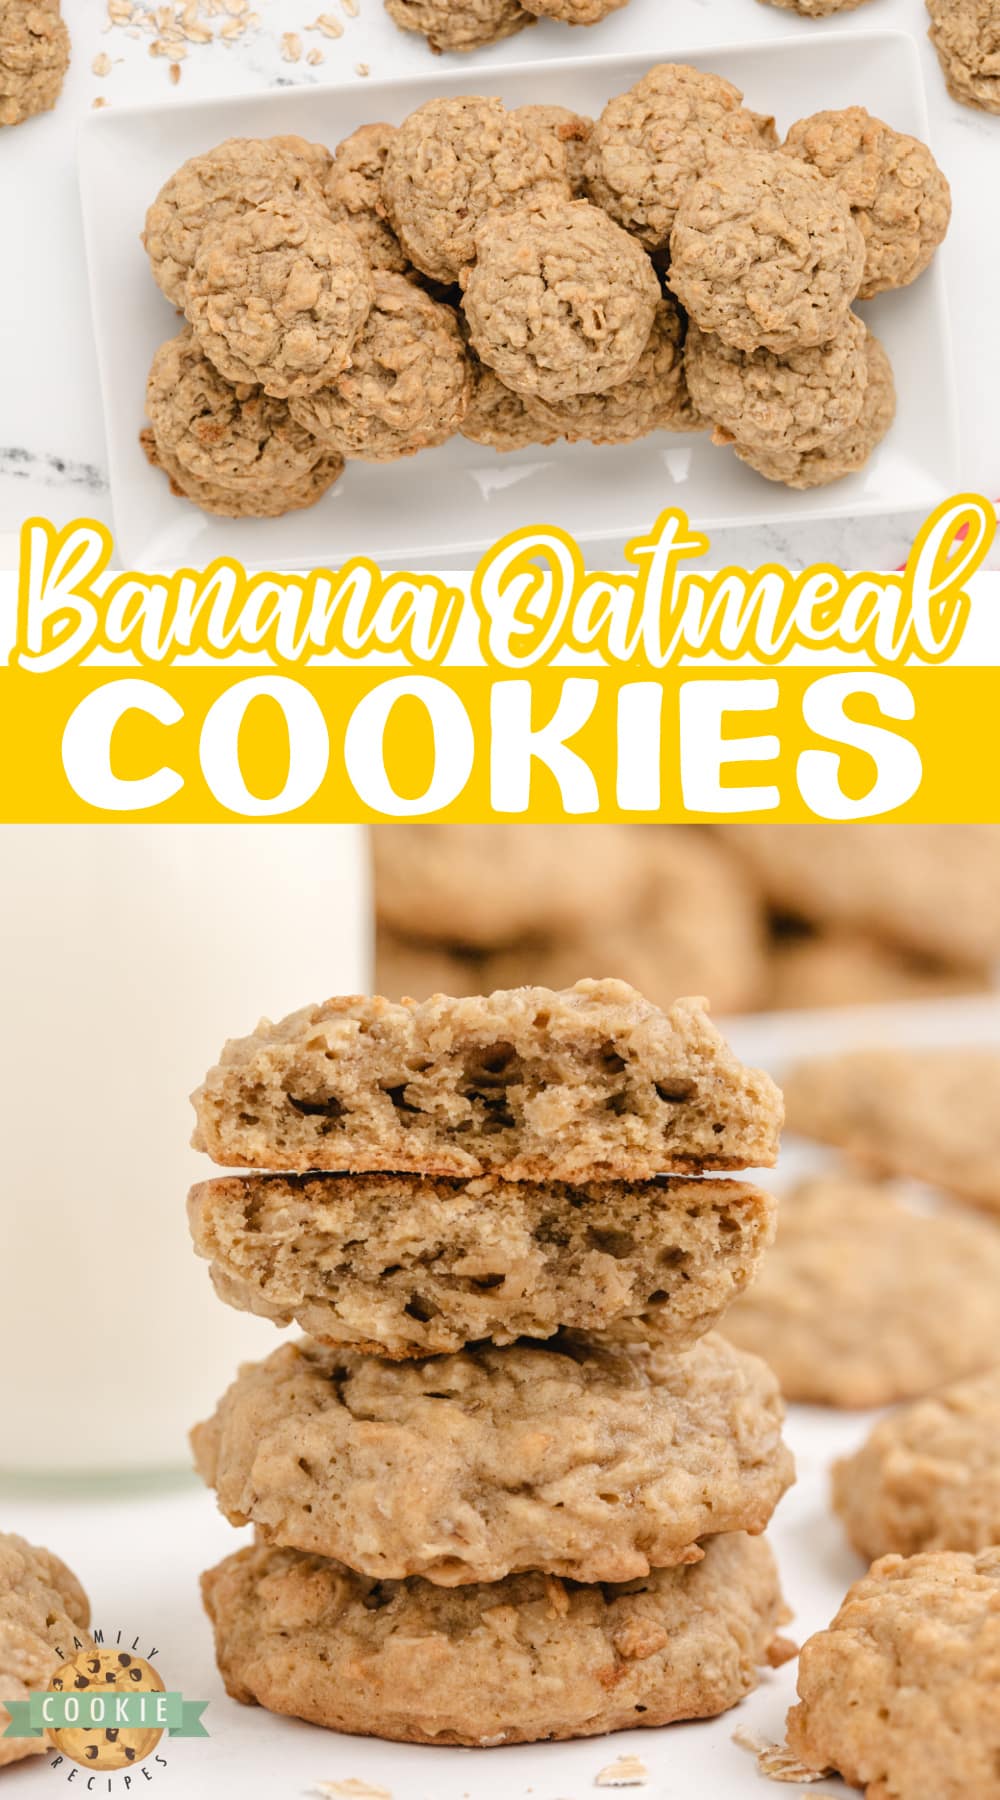 Banana Oatmeal Cookies are soft, chewy, and made with banana pudding mix and fresh bananas! Easy oatmeal cookie recipe with a ton of banana flavor!